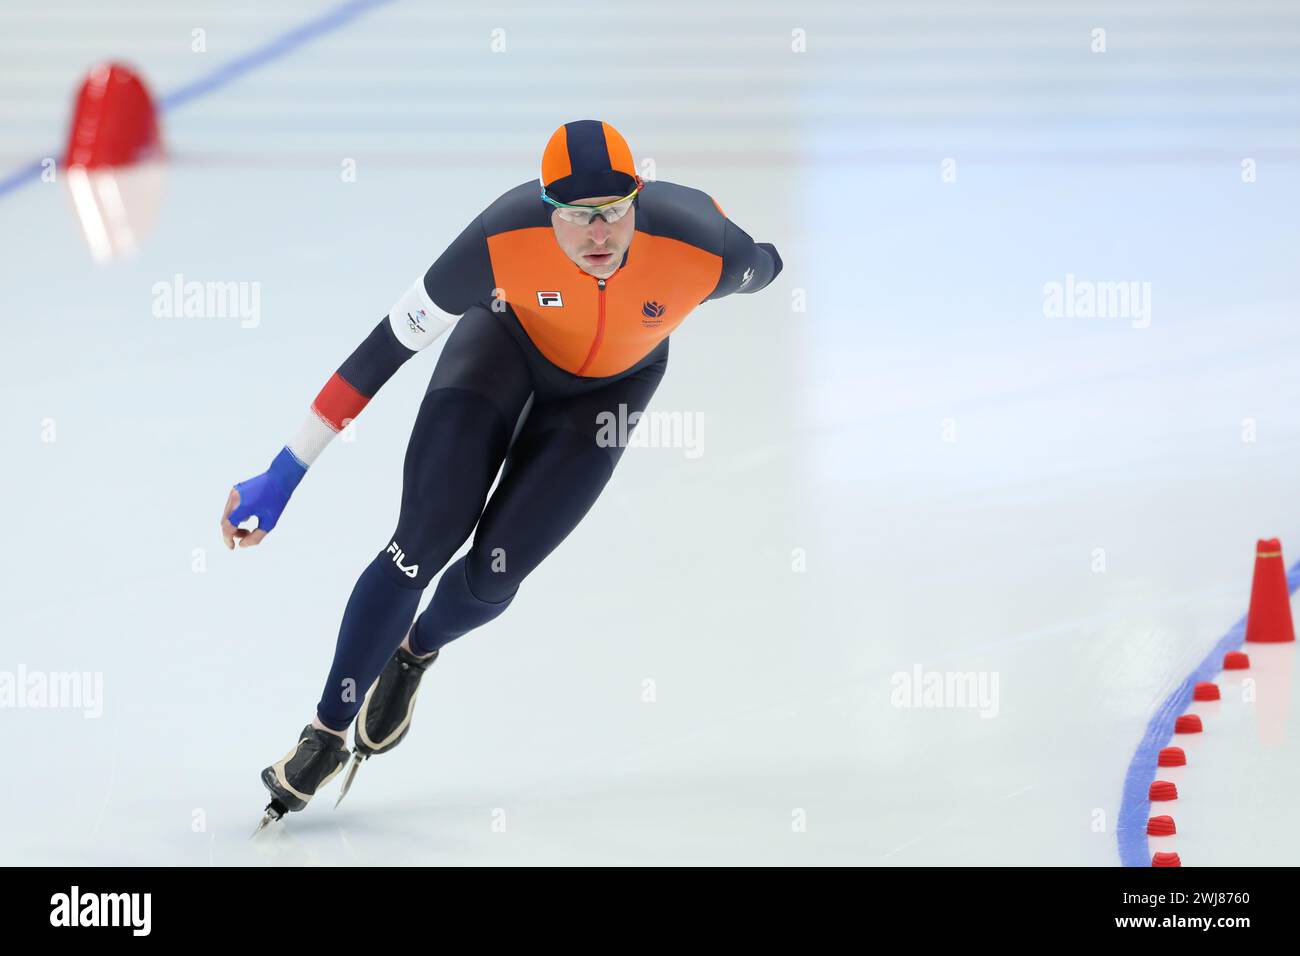 FEB 6, 2022 - Beijing, China: Sven Kramer of Team Netherlands competes in the Speed Skating Men's 5,000m Final at the Beijing 2022 Winter Olympic Game Stock Photo